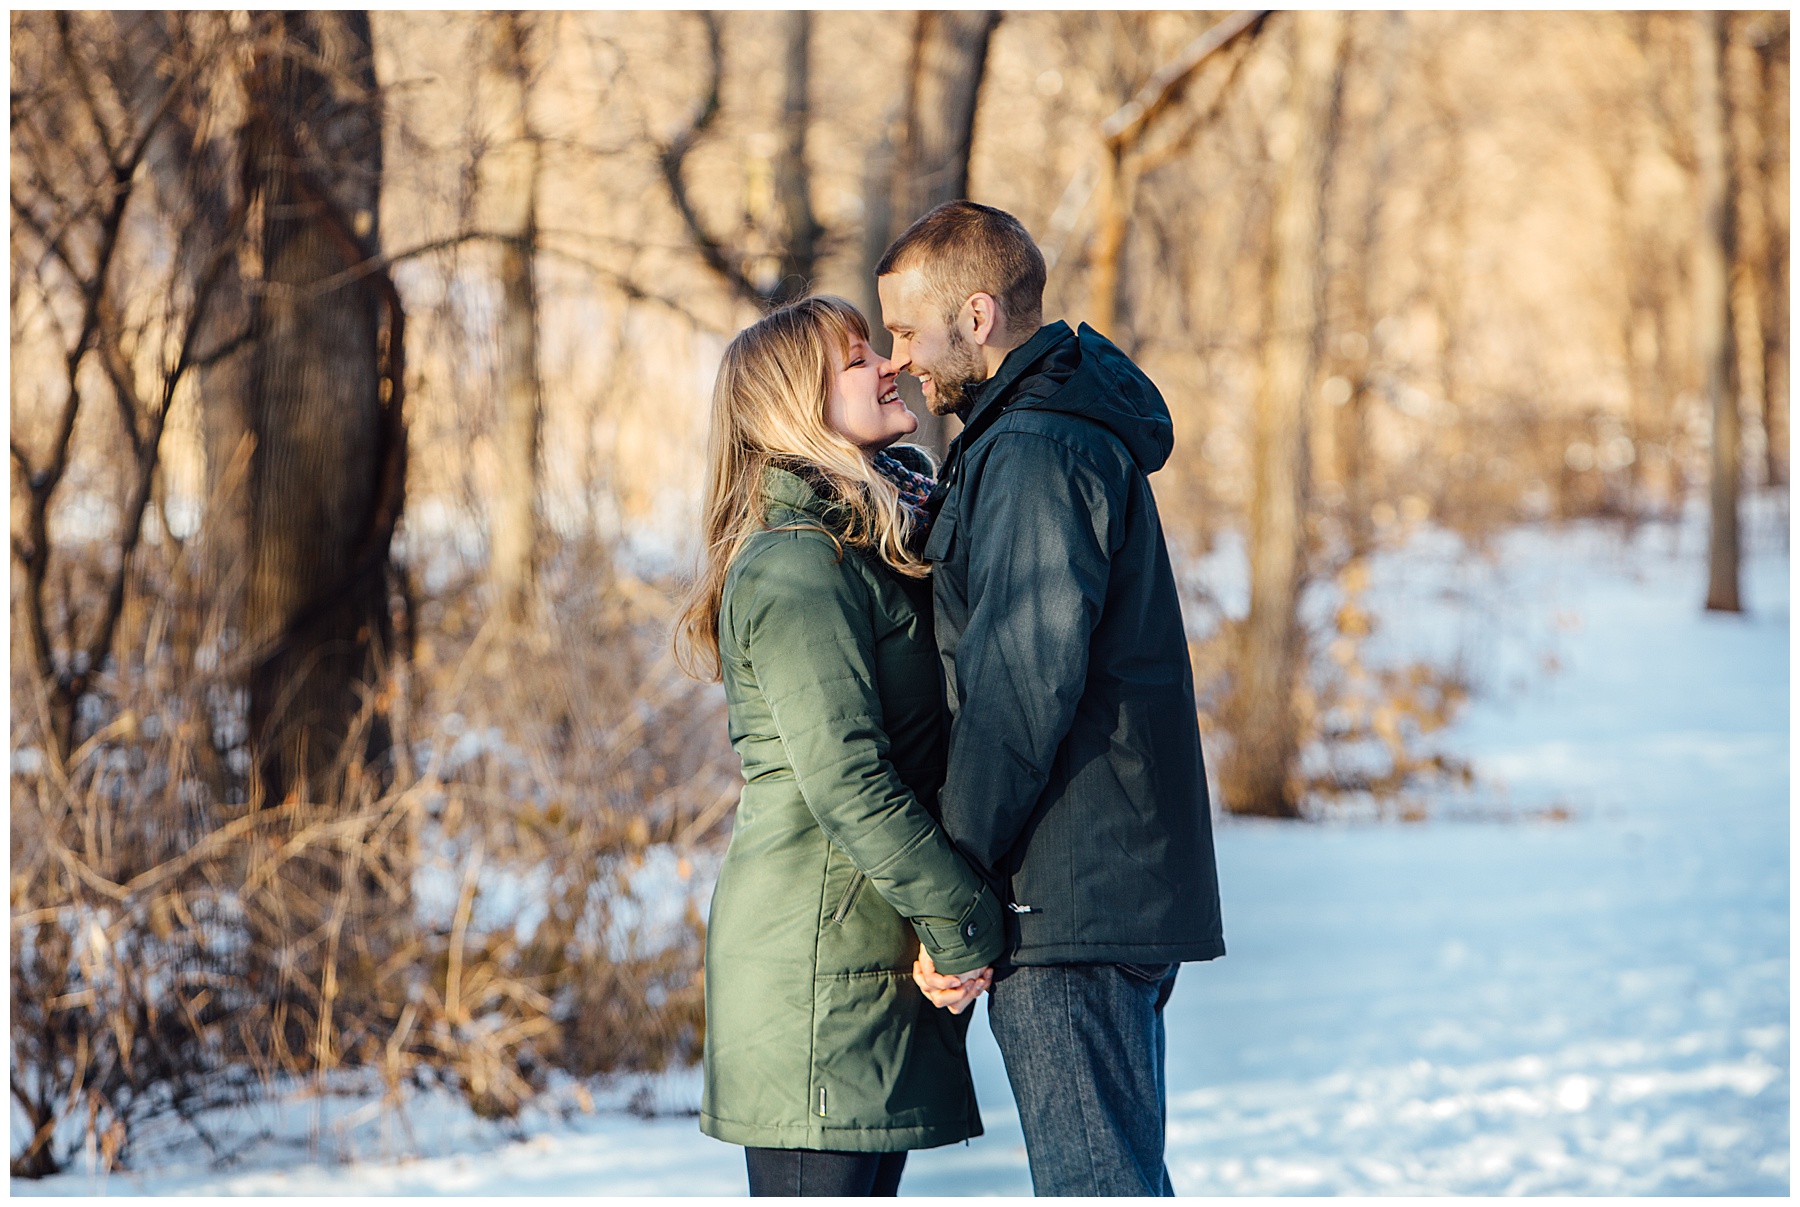 Engagements with snow in the background